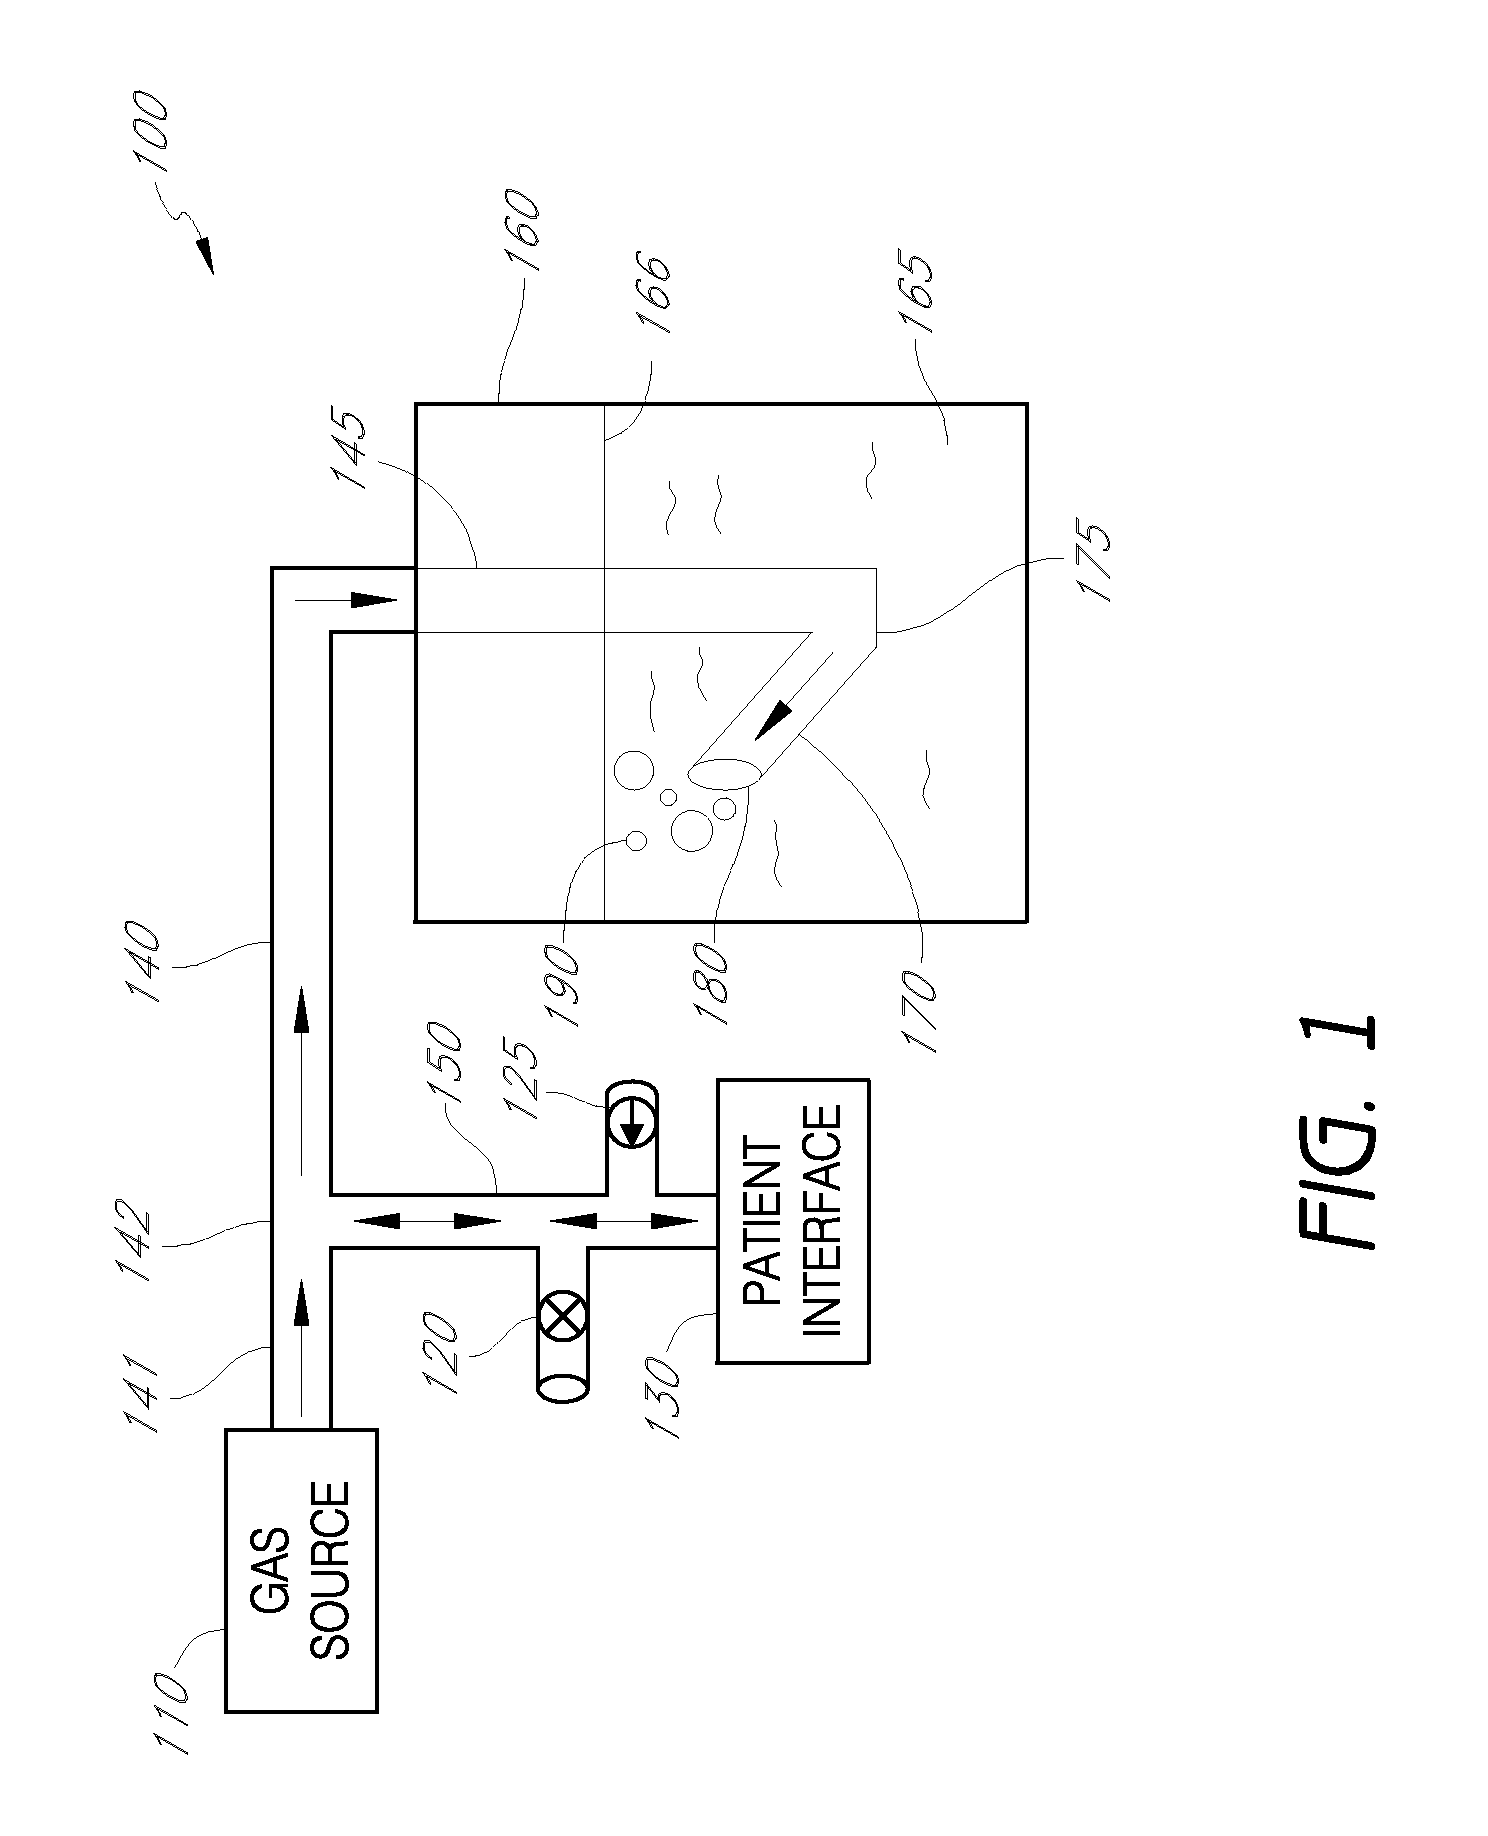 Broad-band, low frequency, high-amplitude, long time duration, oscillating airway pressure breathing apparatus and method utilizing bubbles